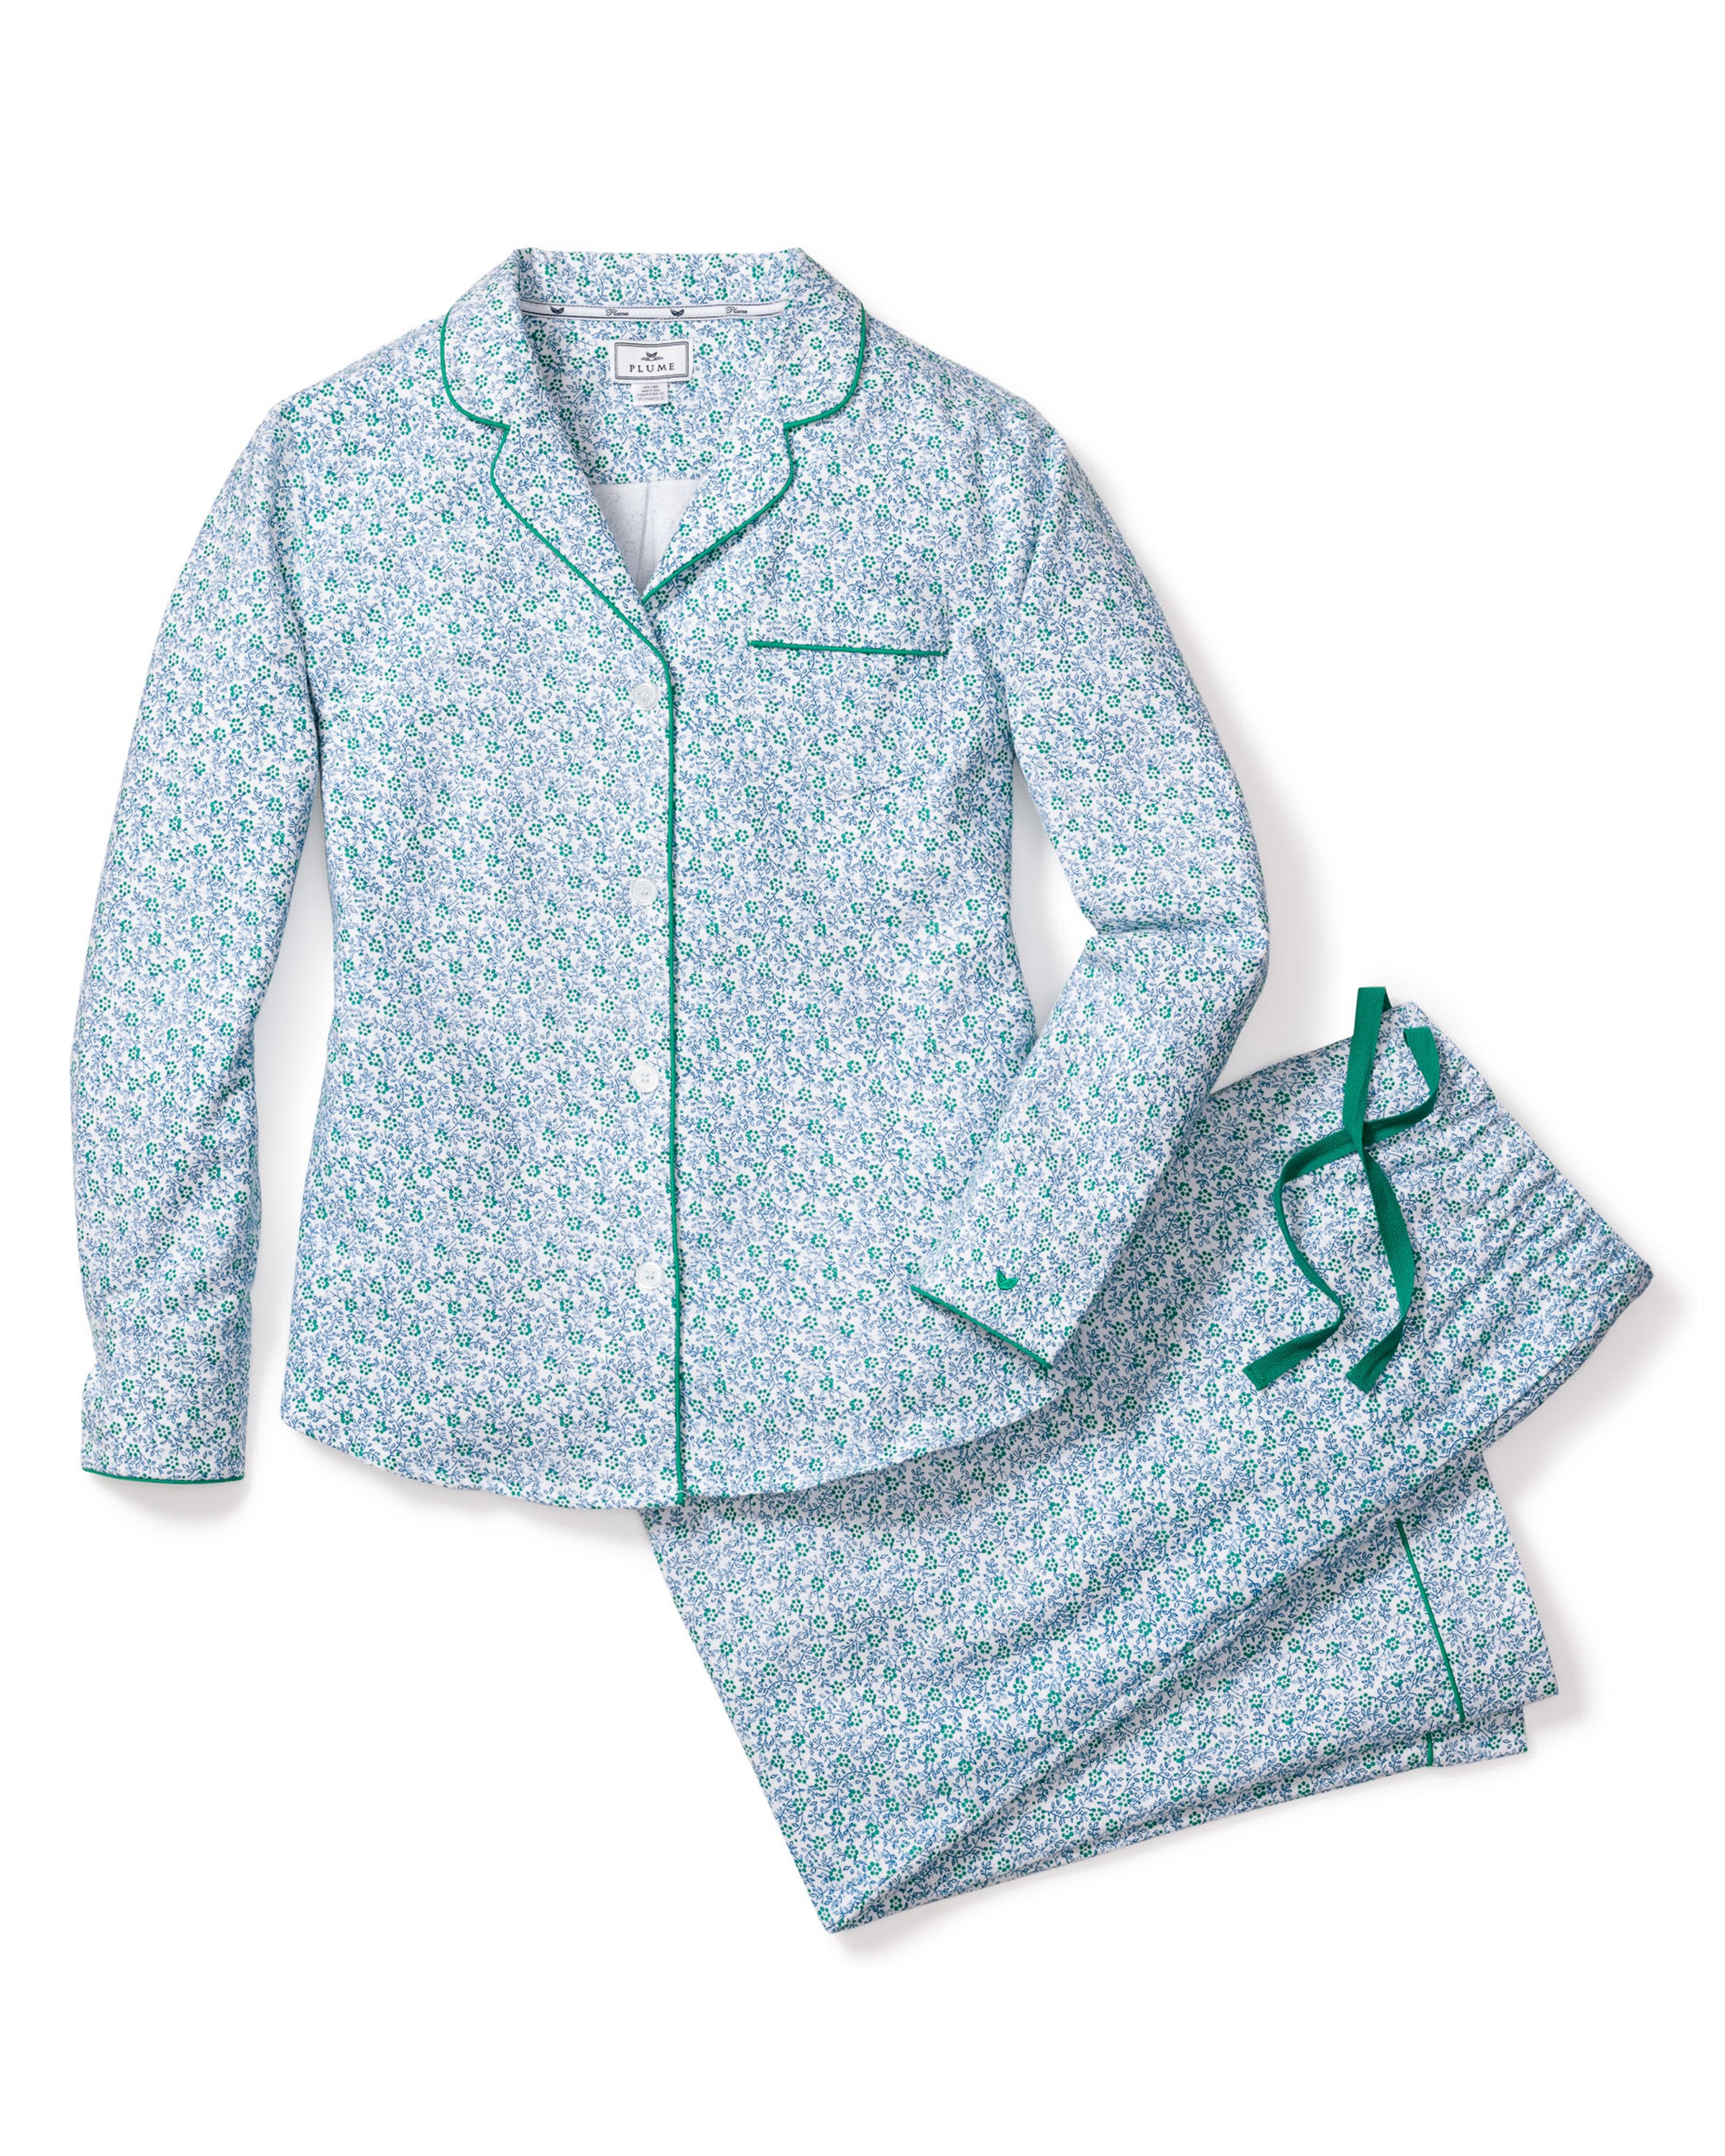 Women's Flannel Pajama Set in Stafford Floral